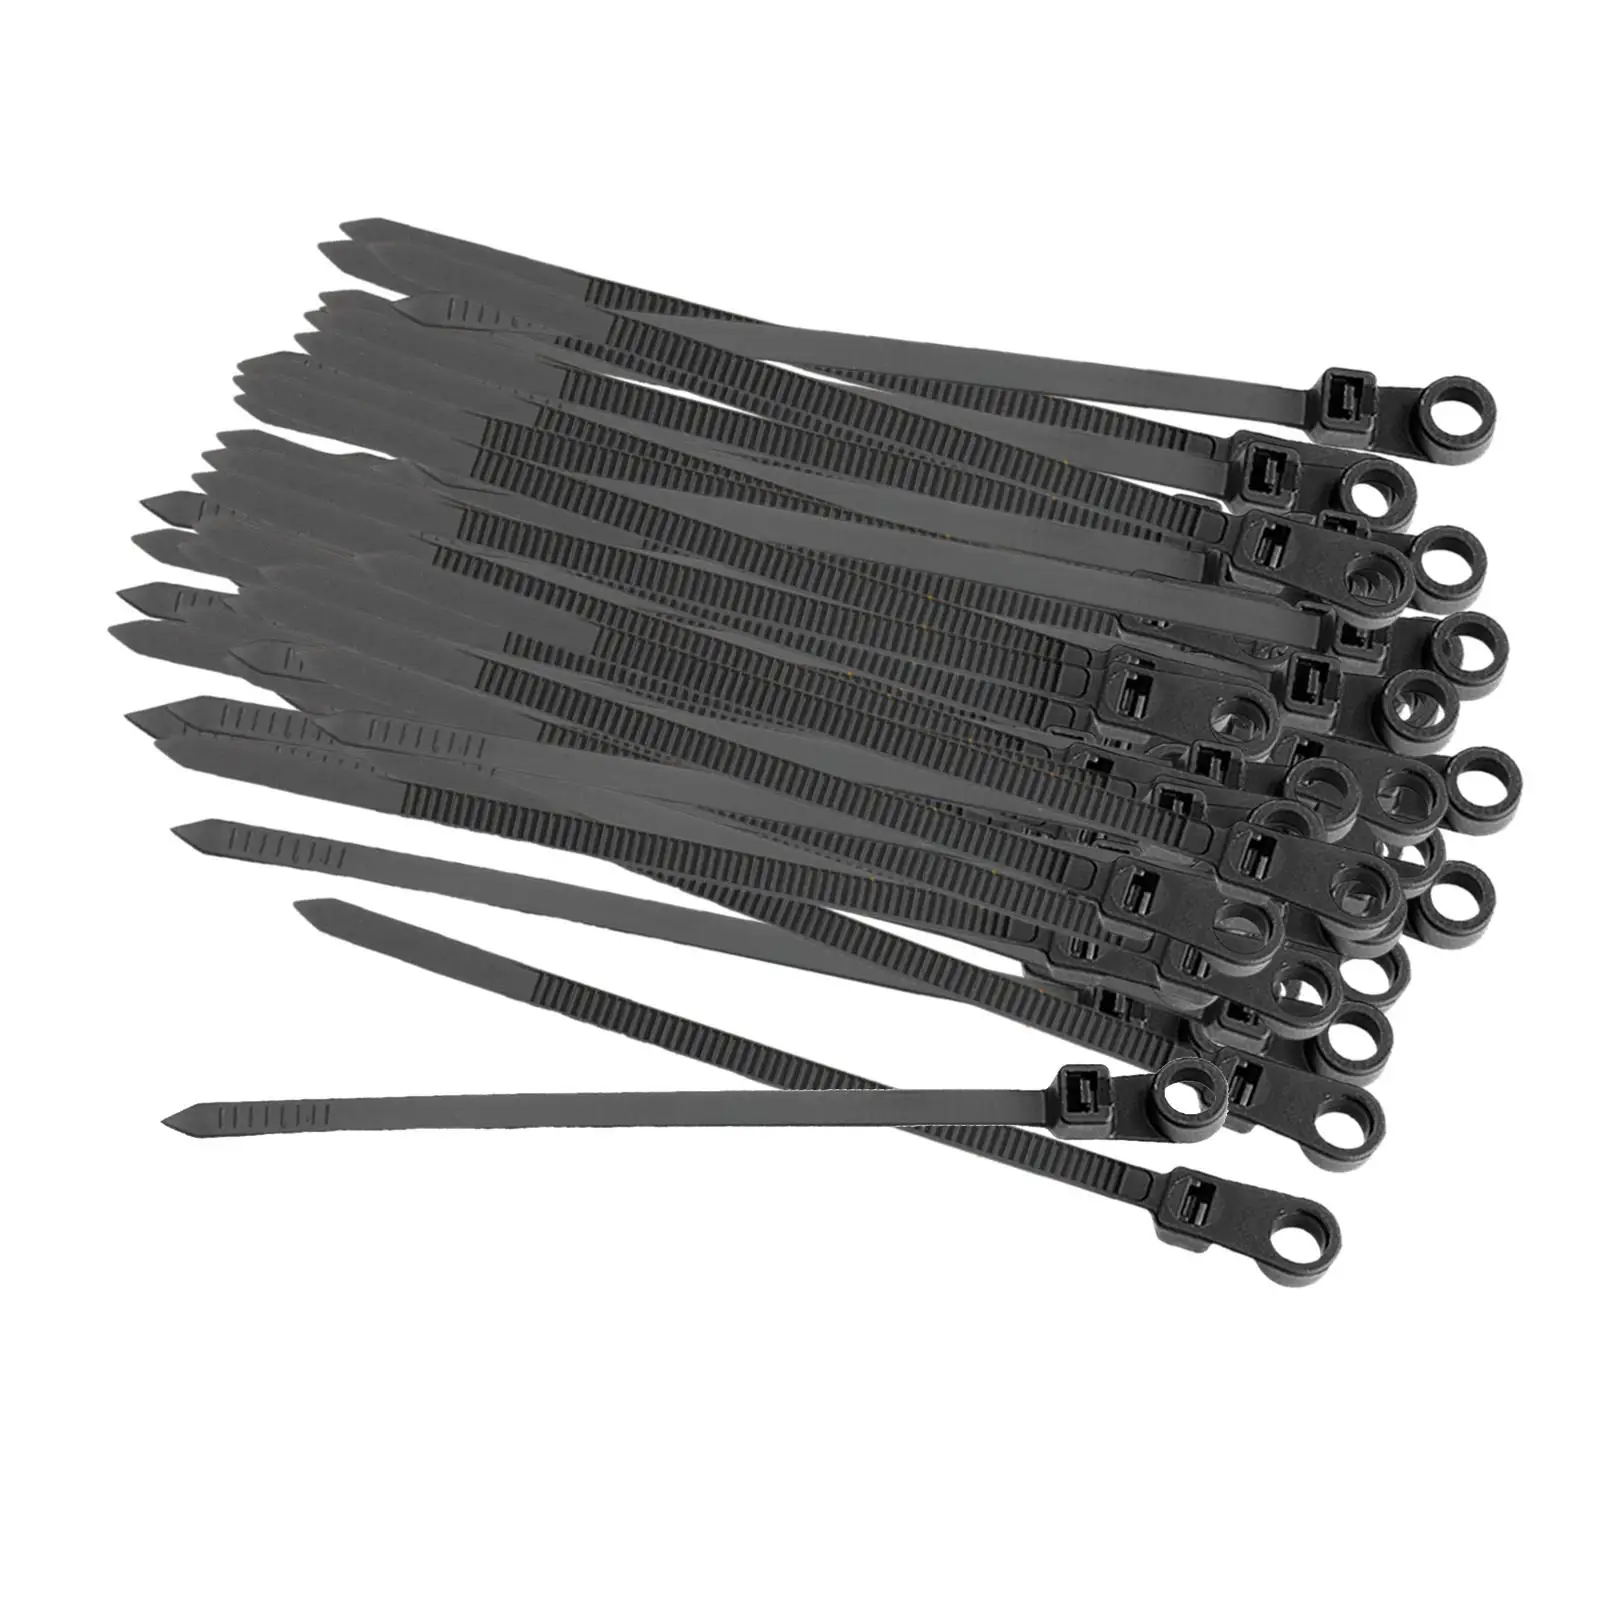 100Pcs Nylon Cable Ties with Fixed Holes Sturdy Self Locking Tie Wraps for Home Indoor Outdoor Garden Trellis Garage